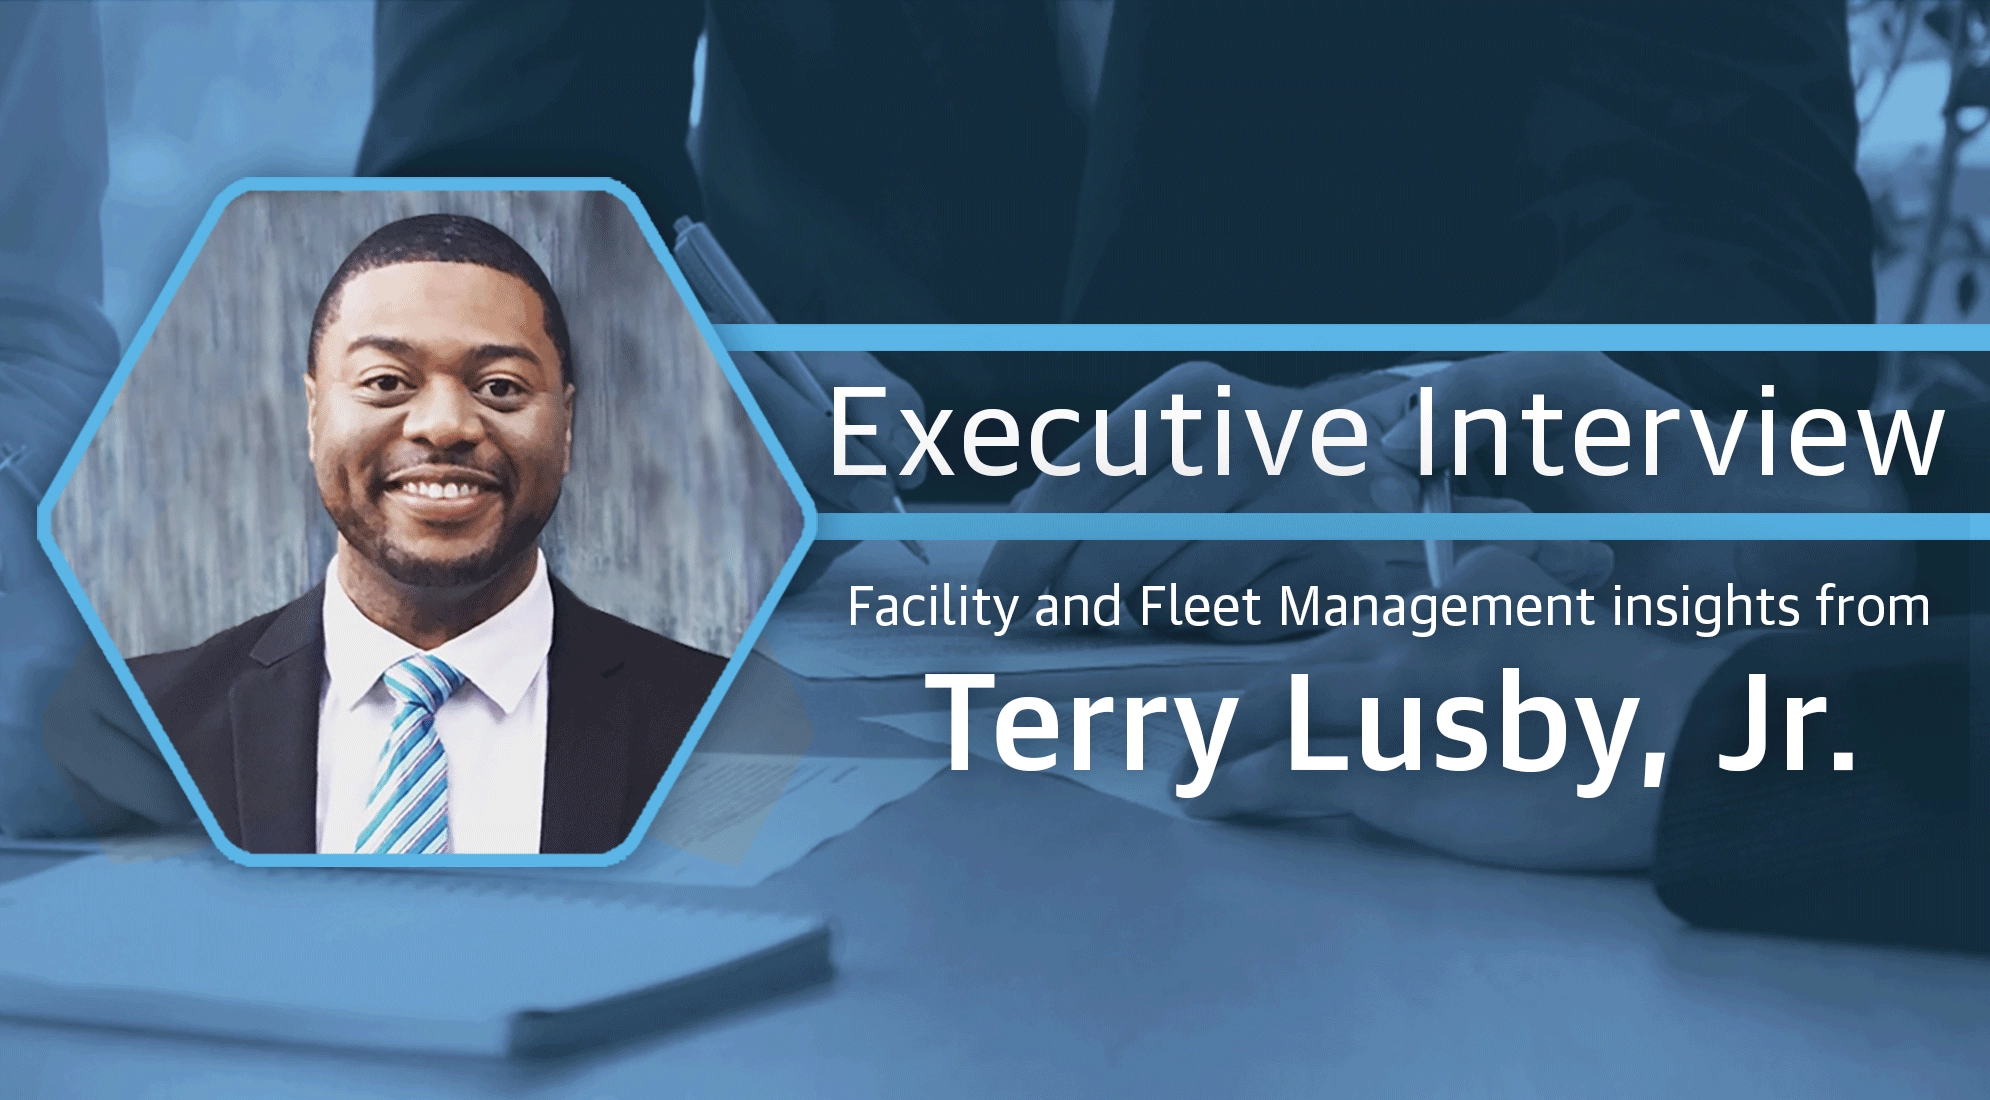 Facilities and Fleet Management Insights from Terry Lusby, Jr. 4